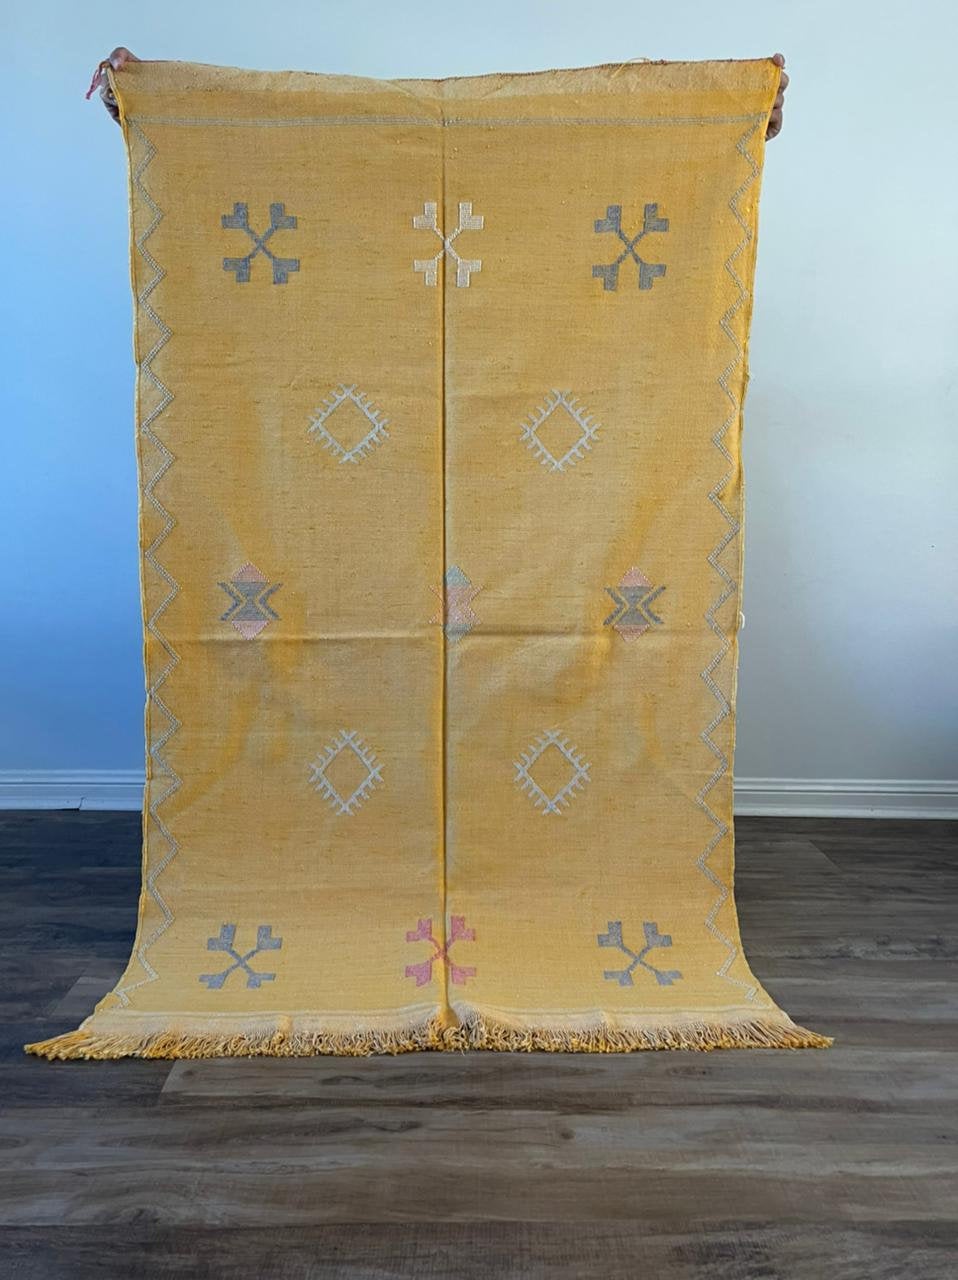 Yellow cactus silk rug with mutli coloured symbols woven into it